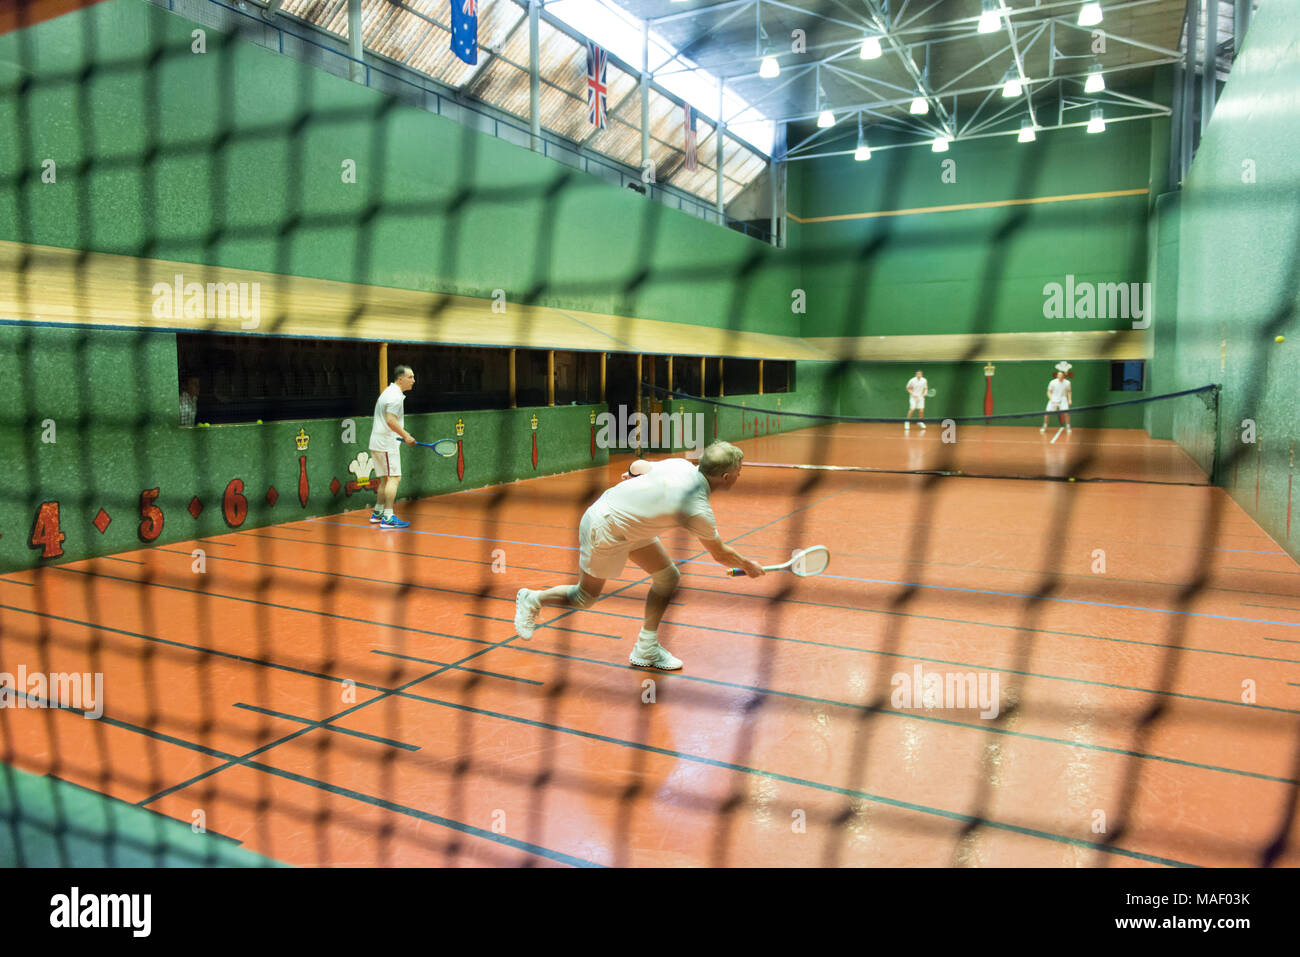 Real Tennis court with players in action. Stock Photo